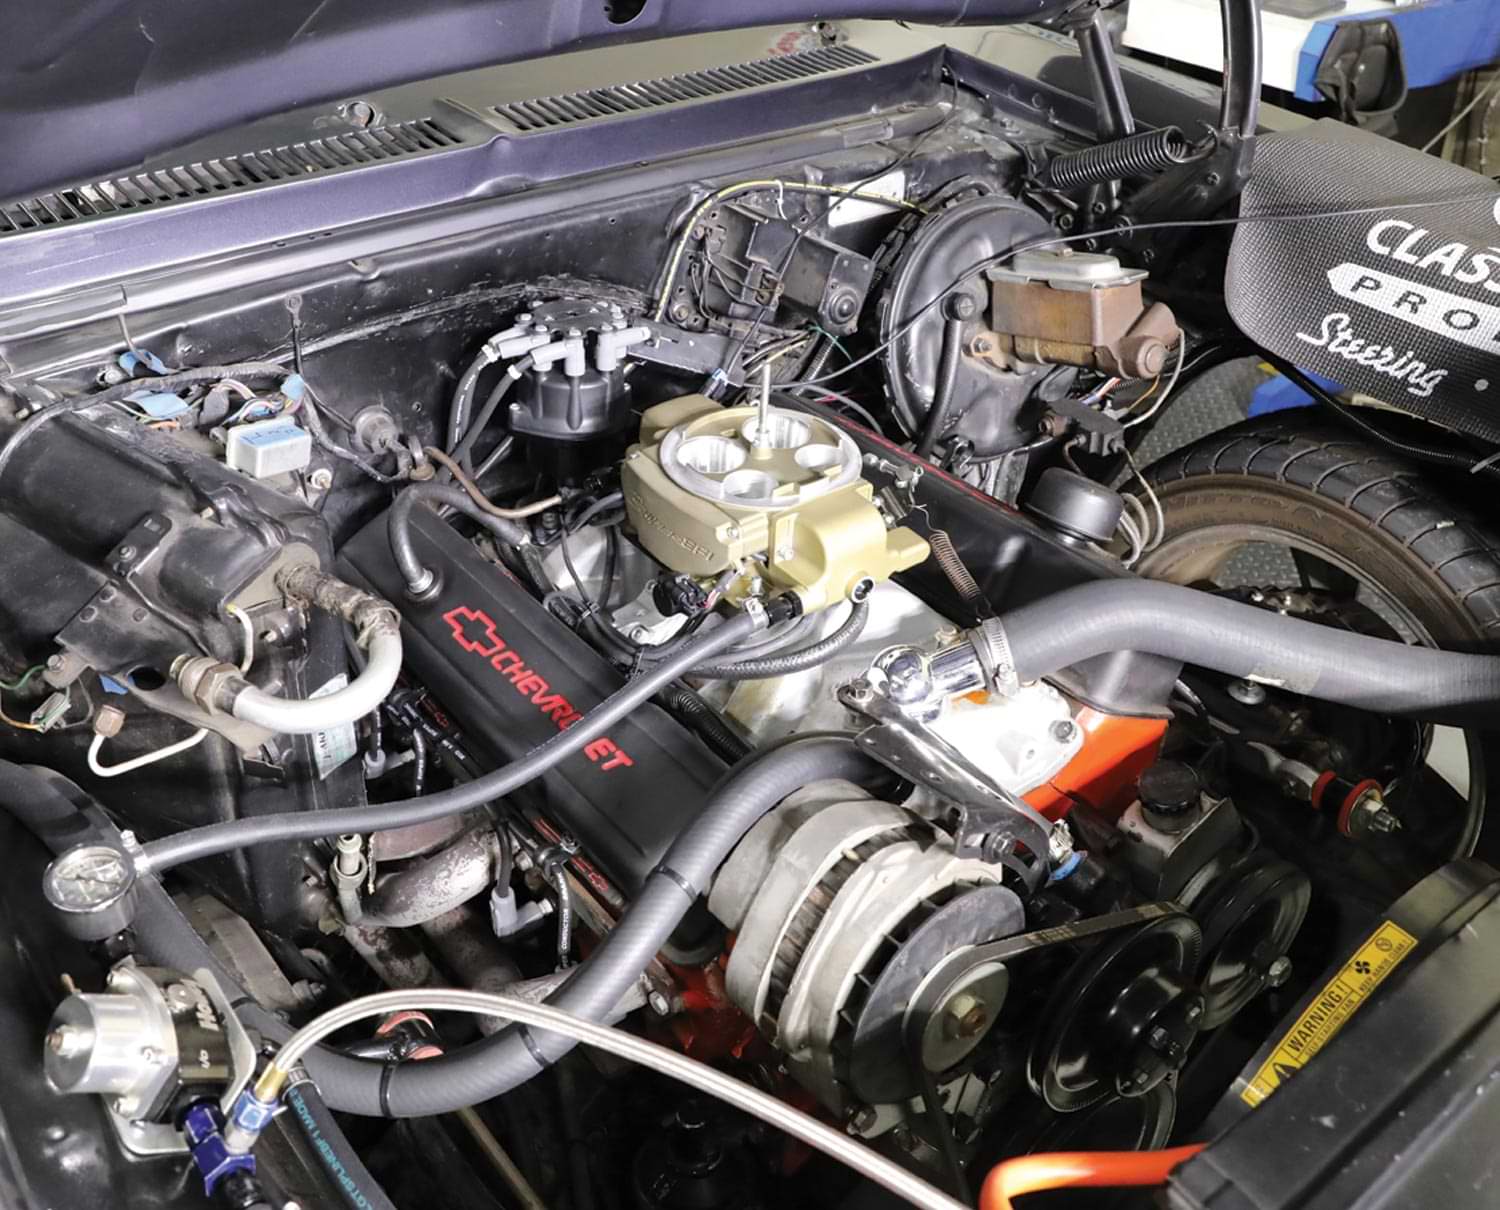 a Chevy engine bay